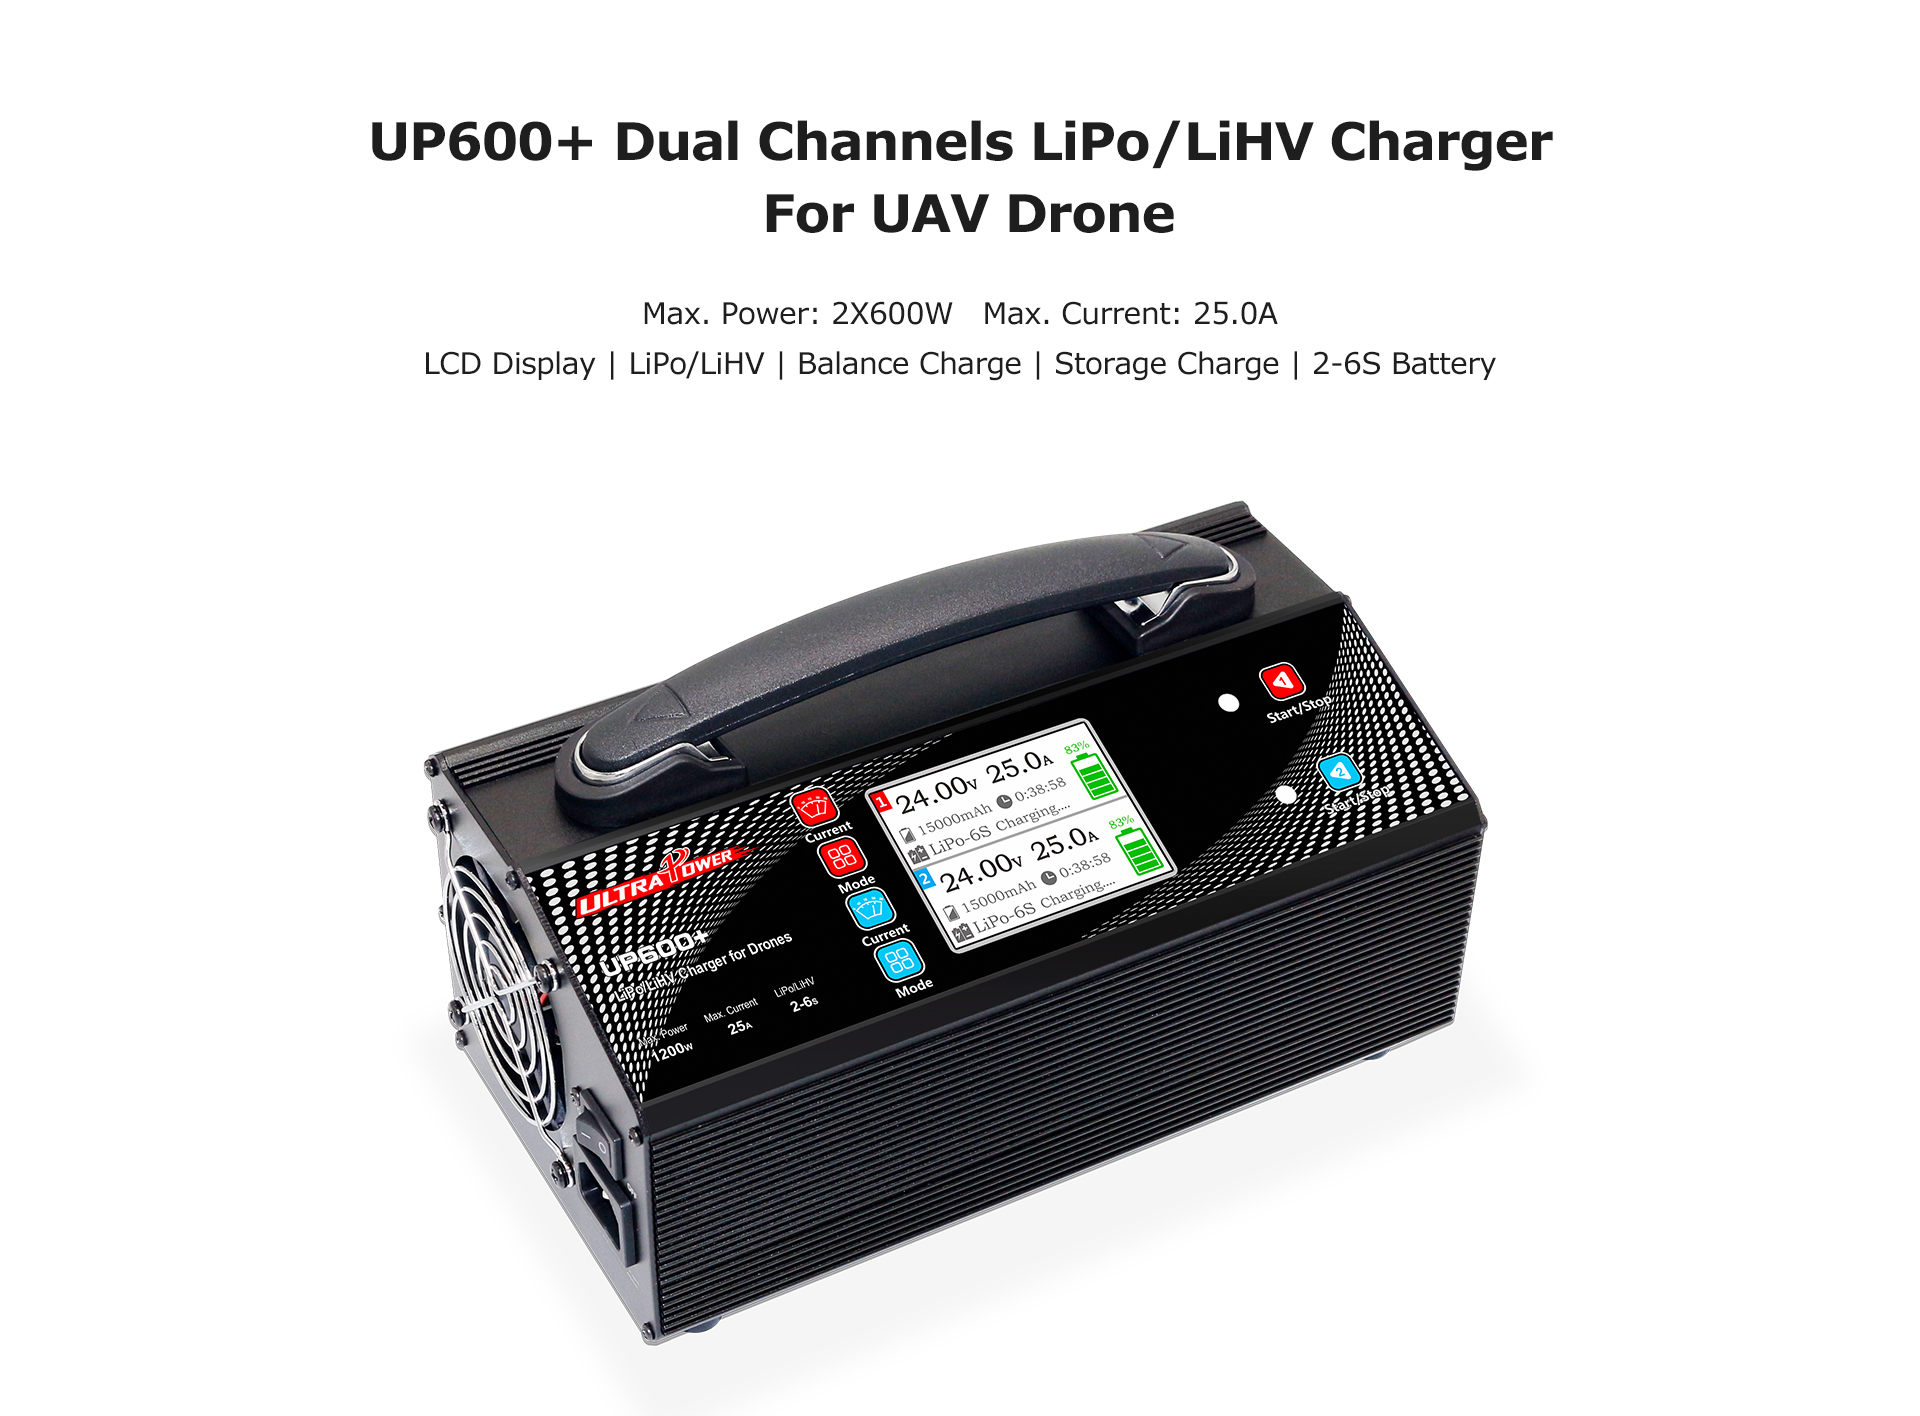 UP600+2X600W 25A 2-6S Battery UAV Drone Charger